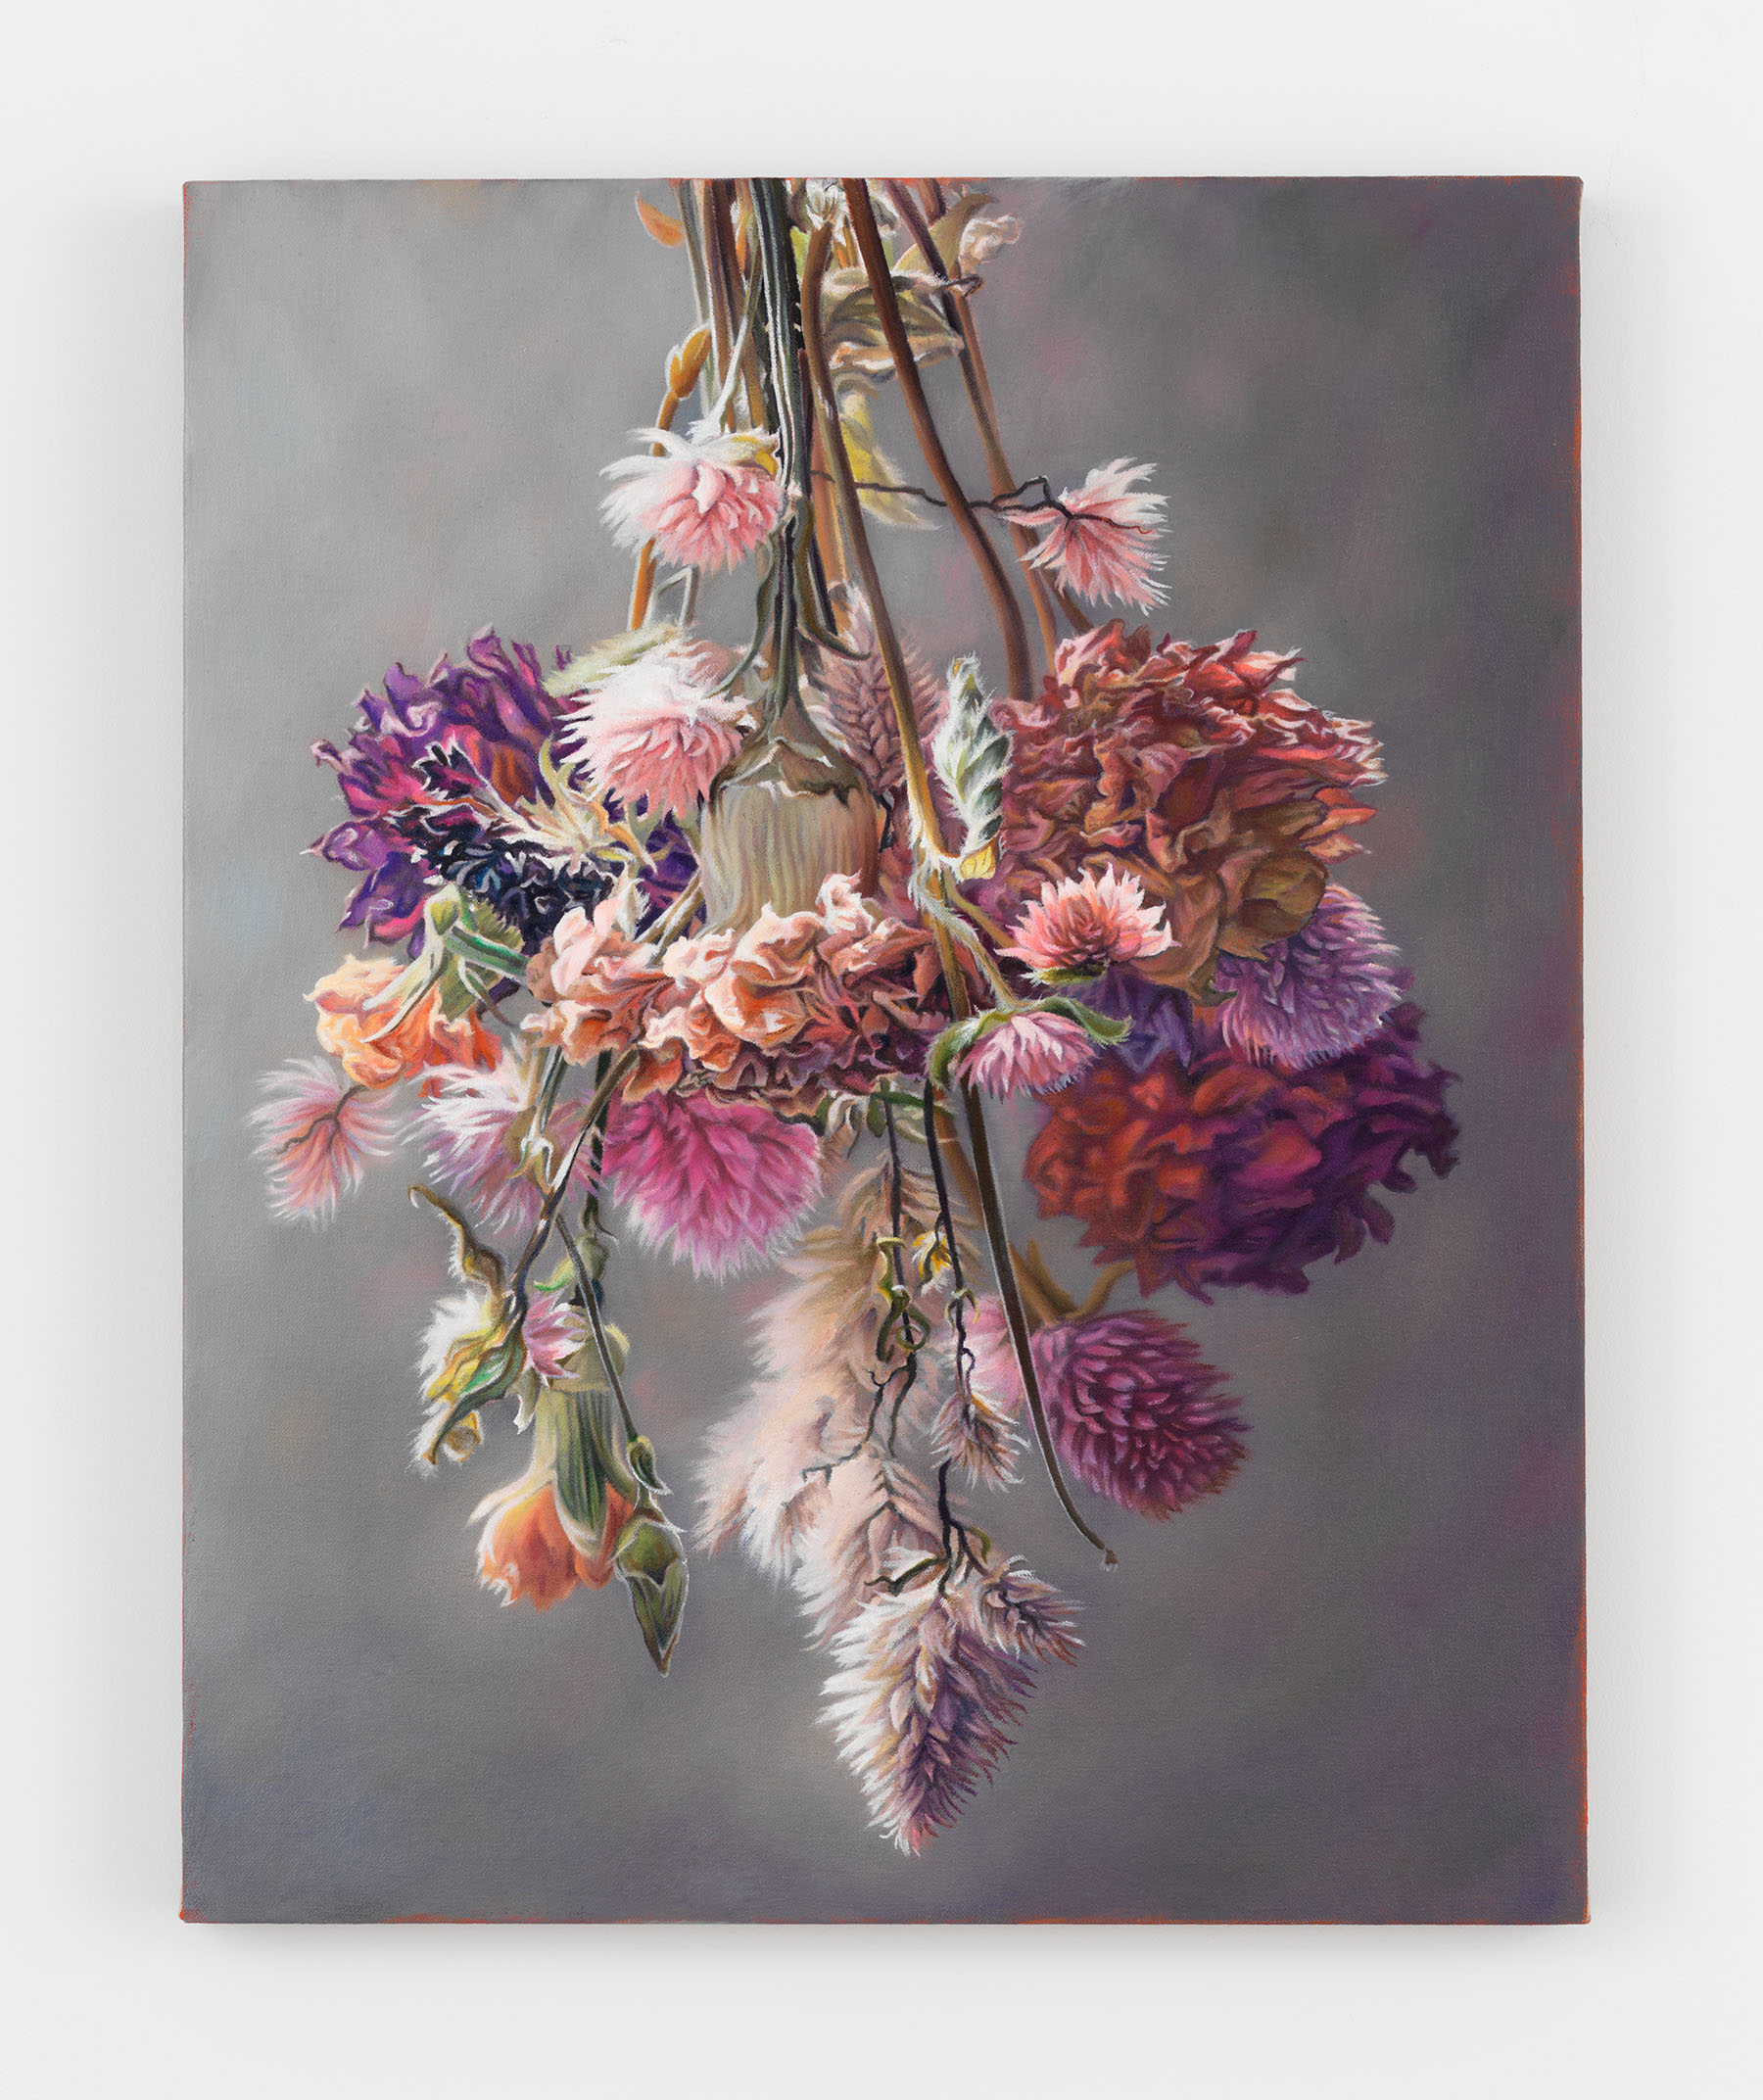 Chason Matthams, Dried Flowers (grey), 2020, Oil on linen over panel, 20h x 16w in.